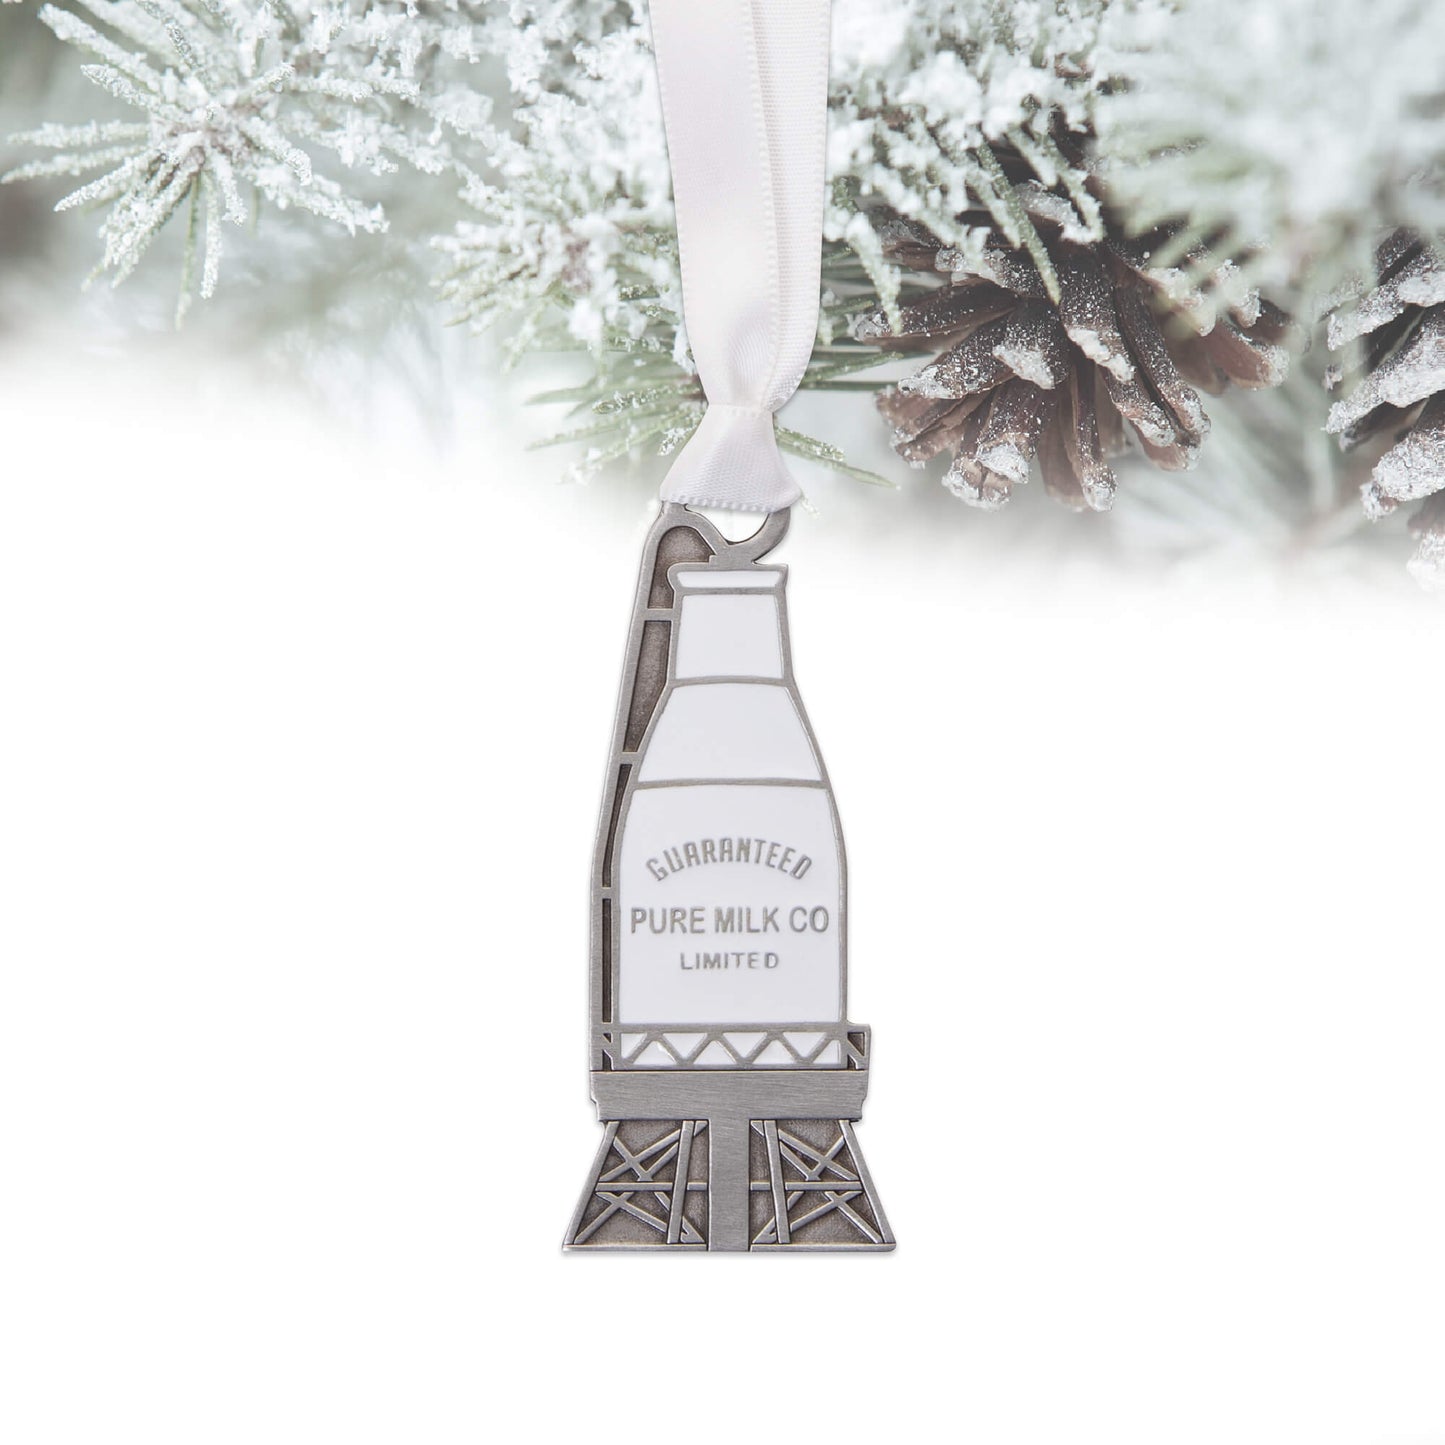 christmas ornament, holiday decoration, pewter, white ribbon, collection, lifestyle image, guaranteed pure milk co ltd ornament, home decor